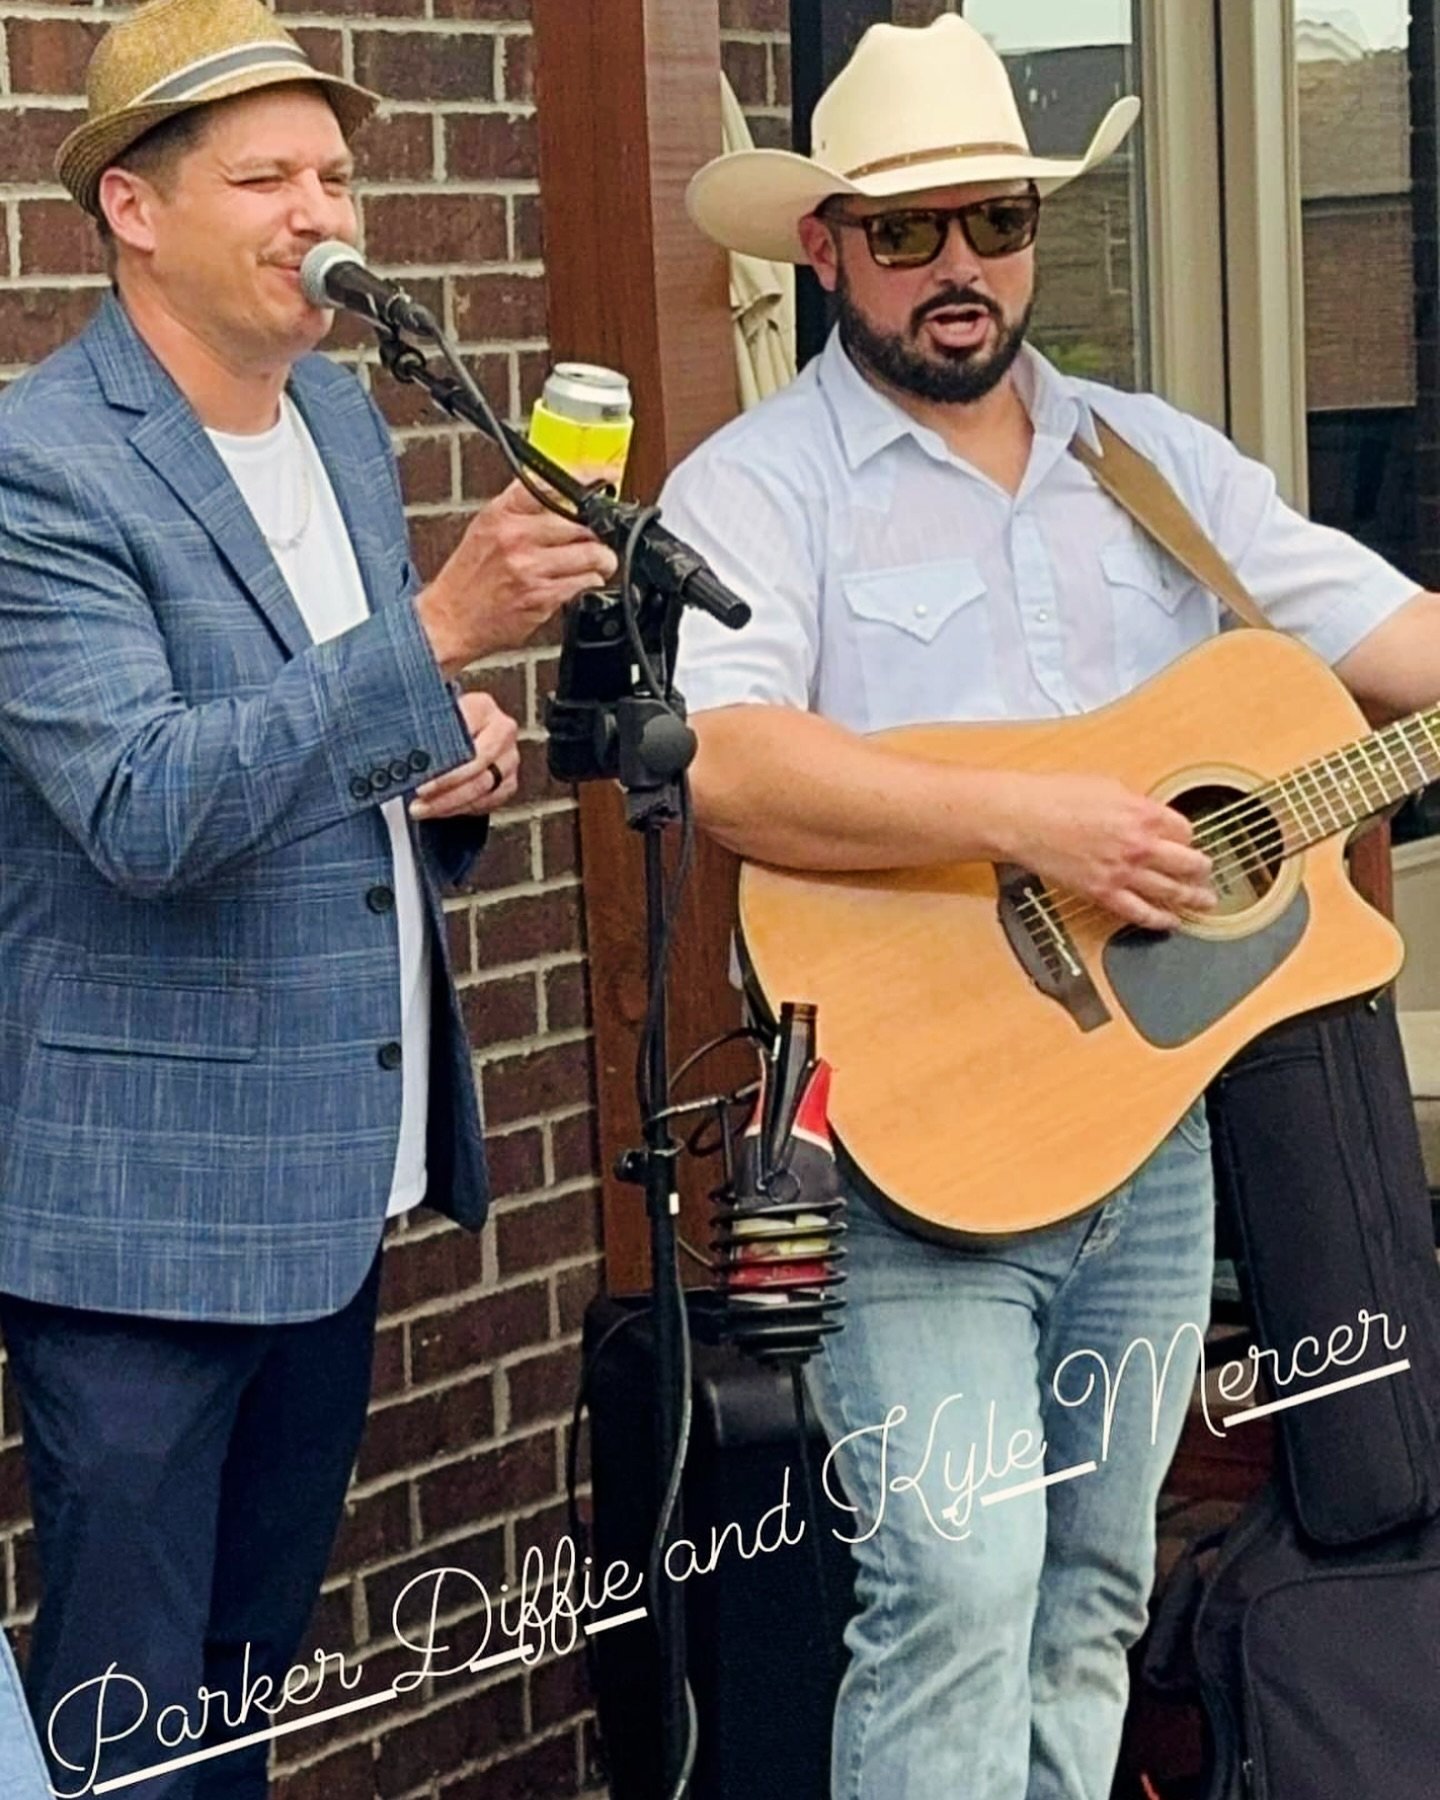 Kentucky Derby Party Shenanigans with my boy Parker sliding in on them vocals for his daddy&rsquo;s song @officialjoediffie &ldquo;Pickup Man&rdquo; #goodpeople #goodfun #hixtapevol3 #livemusic #countrymusic #kentuckyderby